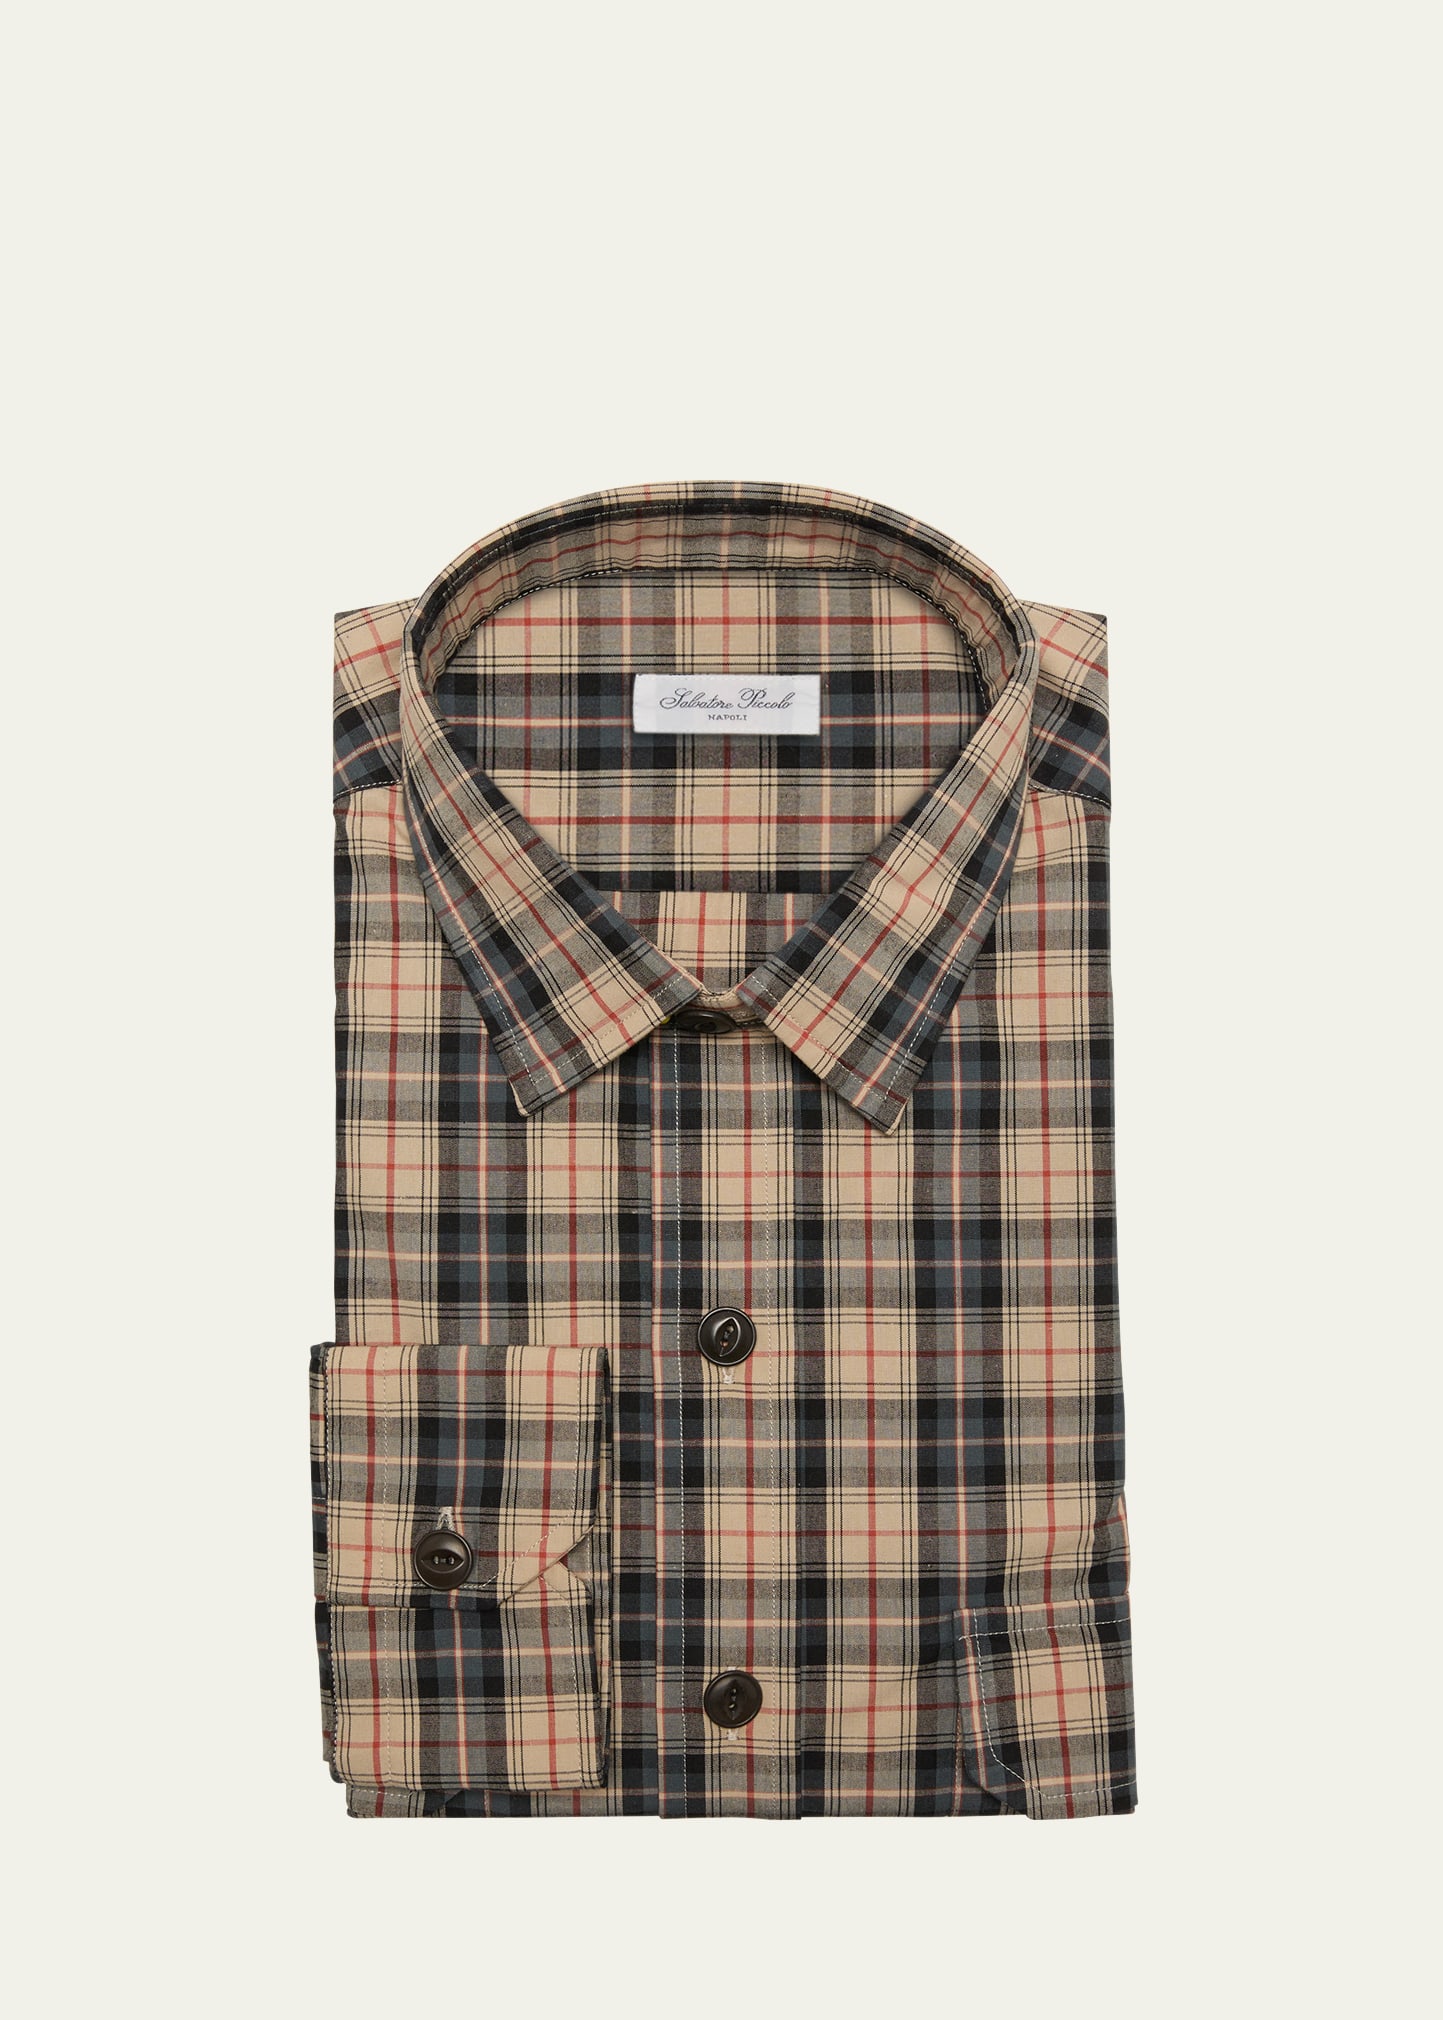 Salvatore Piccolo Men's Plaid Flannel Casual Button-down Shirt In Tan Charcoal Red